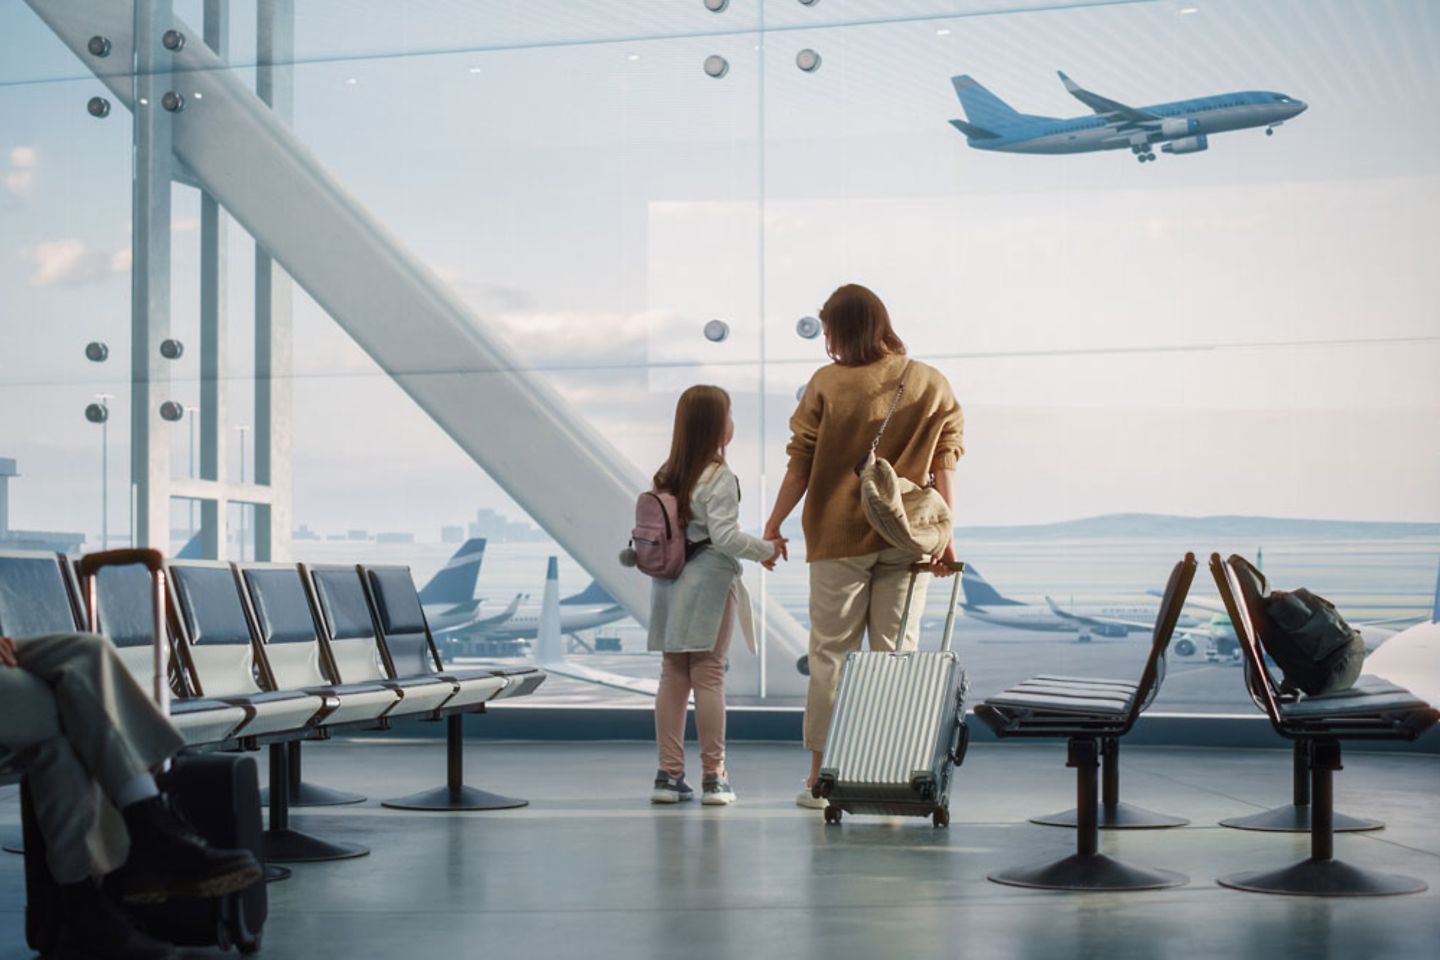 Mother and daughter wait for their flight, looking out of window for arriving and departing airplanes